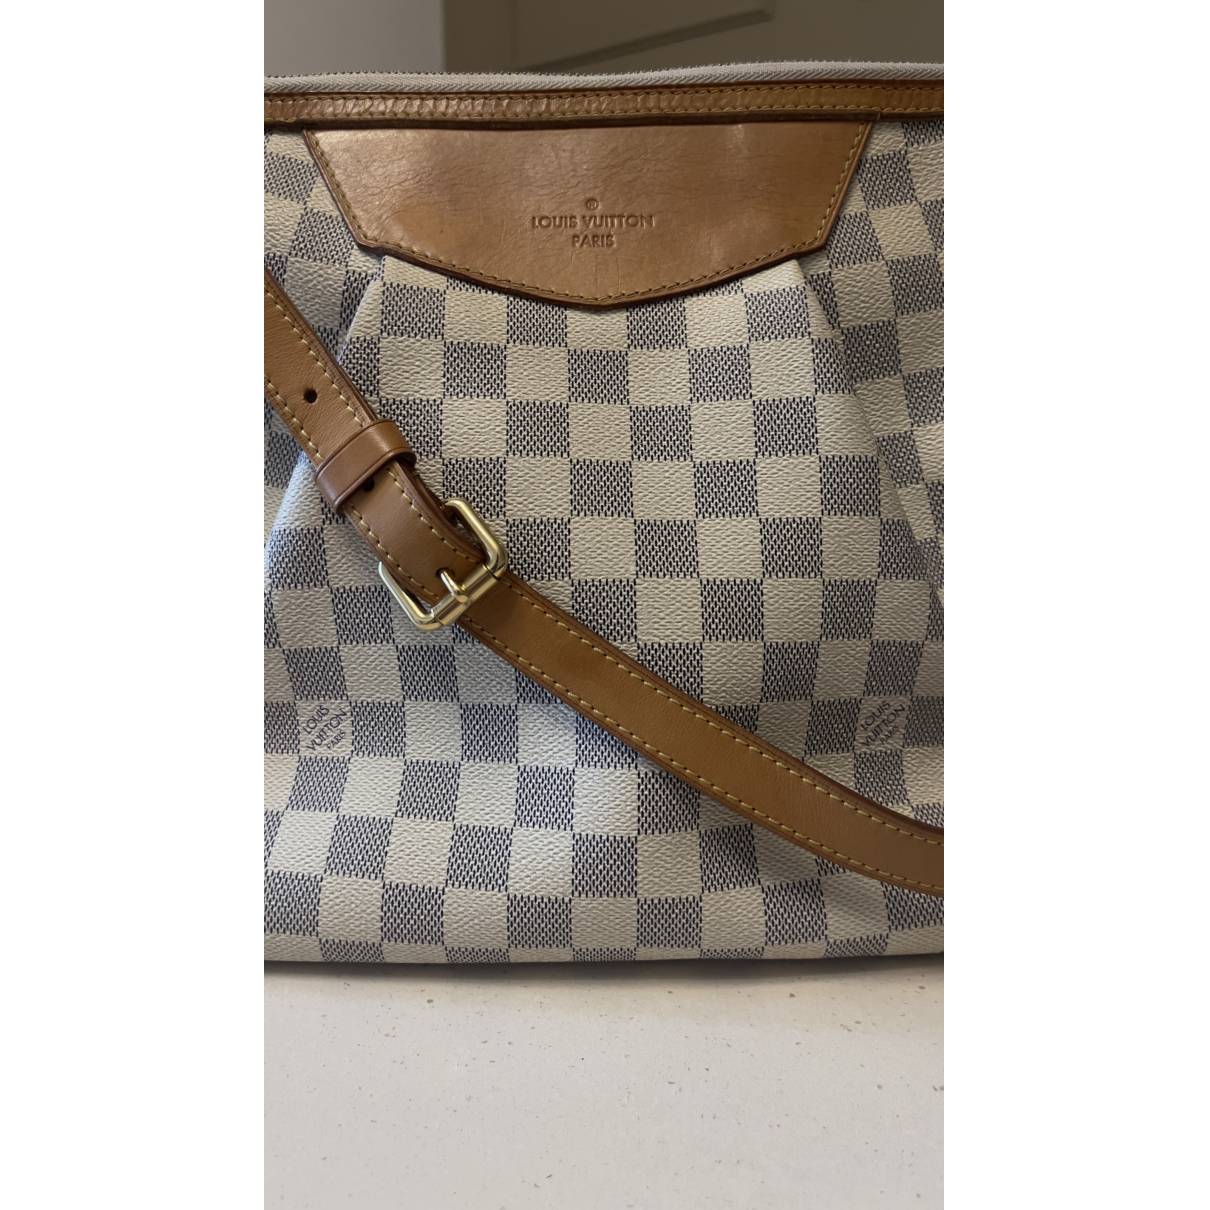 Siracusa leather crossbody bag Louis Vuitton Beige in Leather